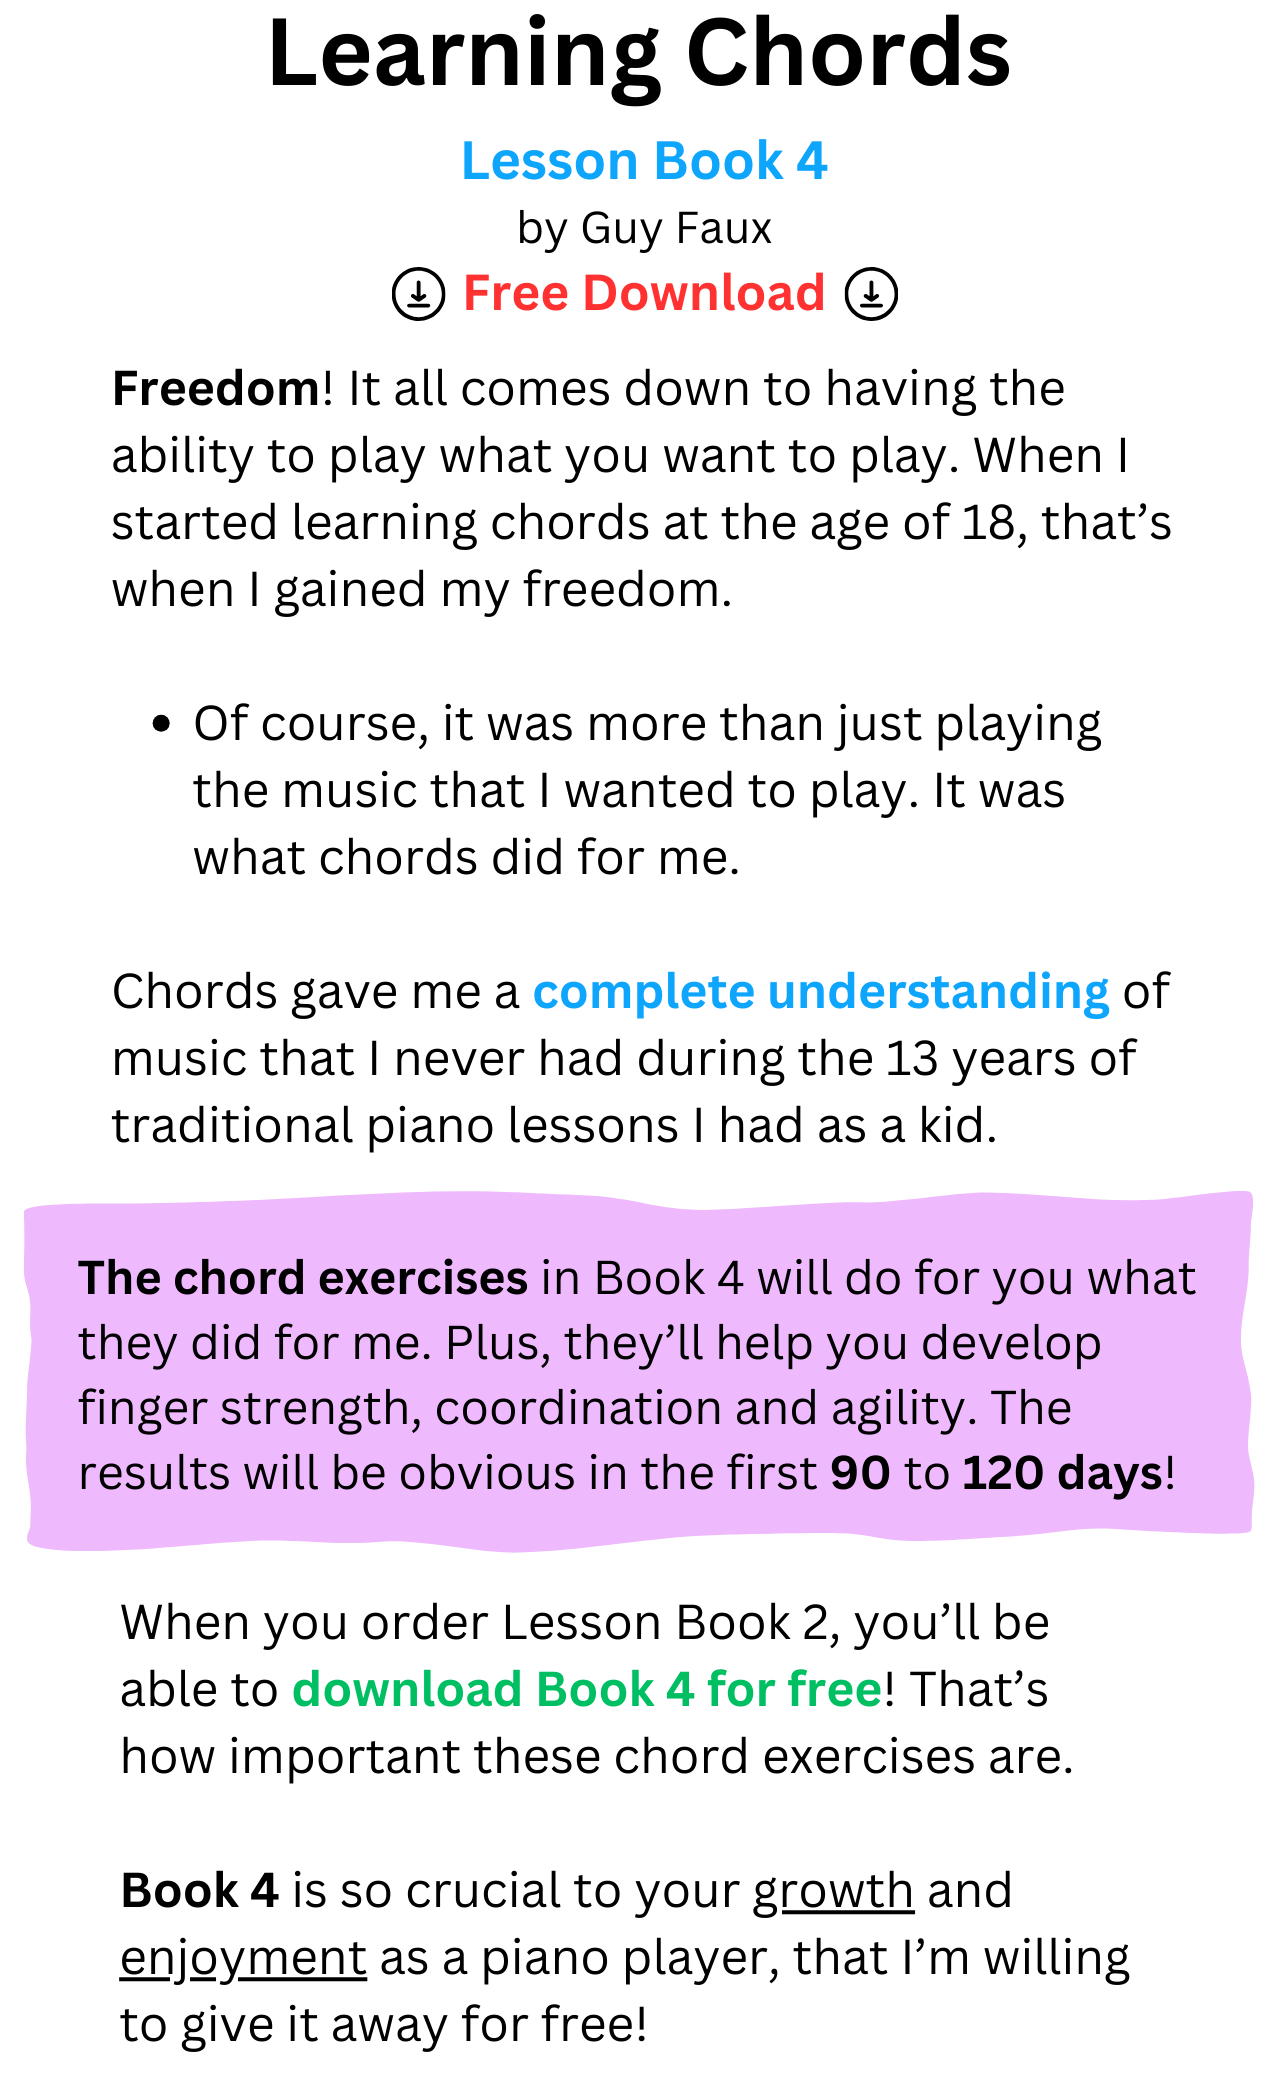 books-1-to-5-chords-Learning-Chords-d